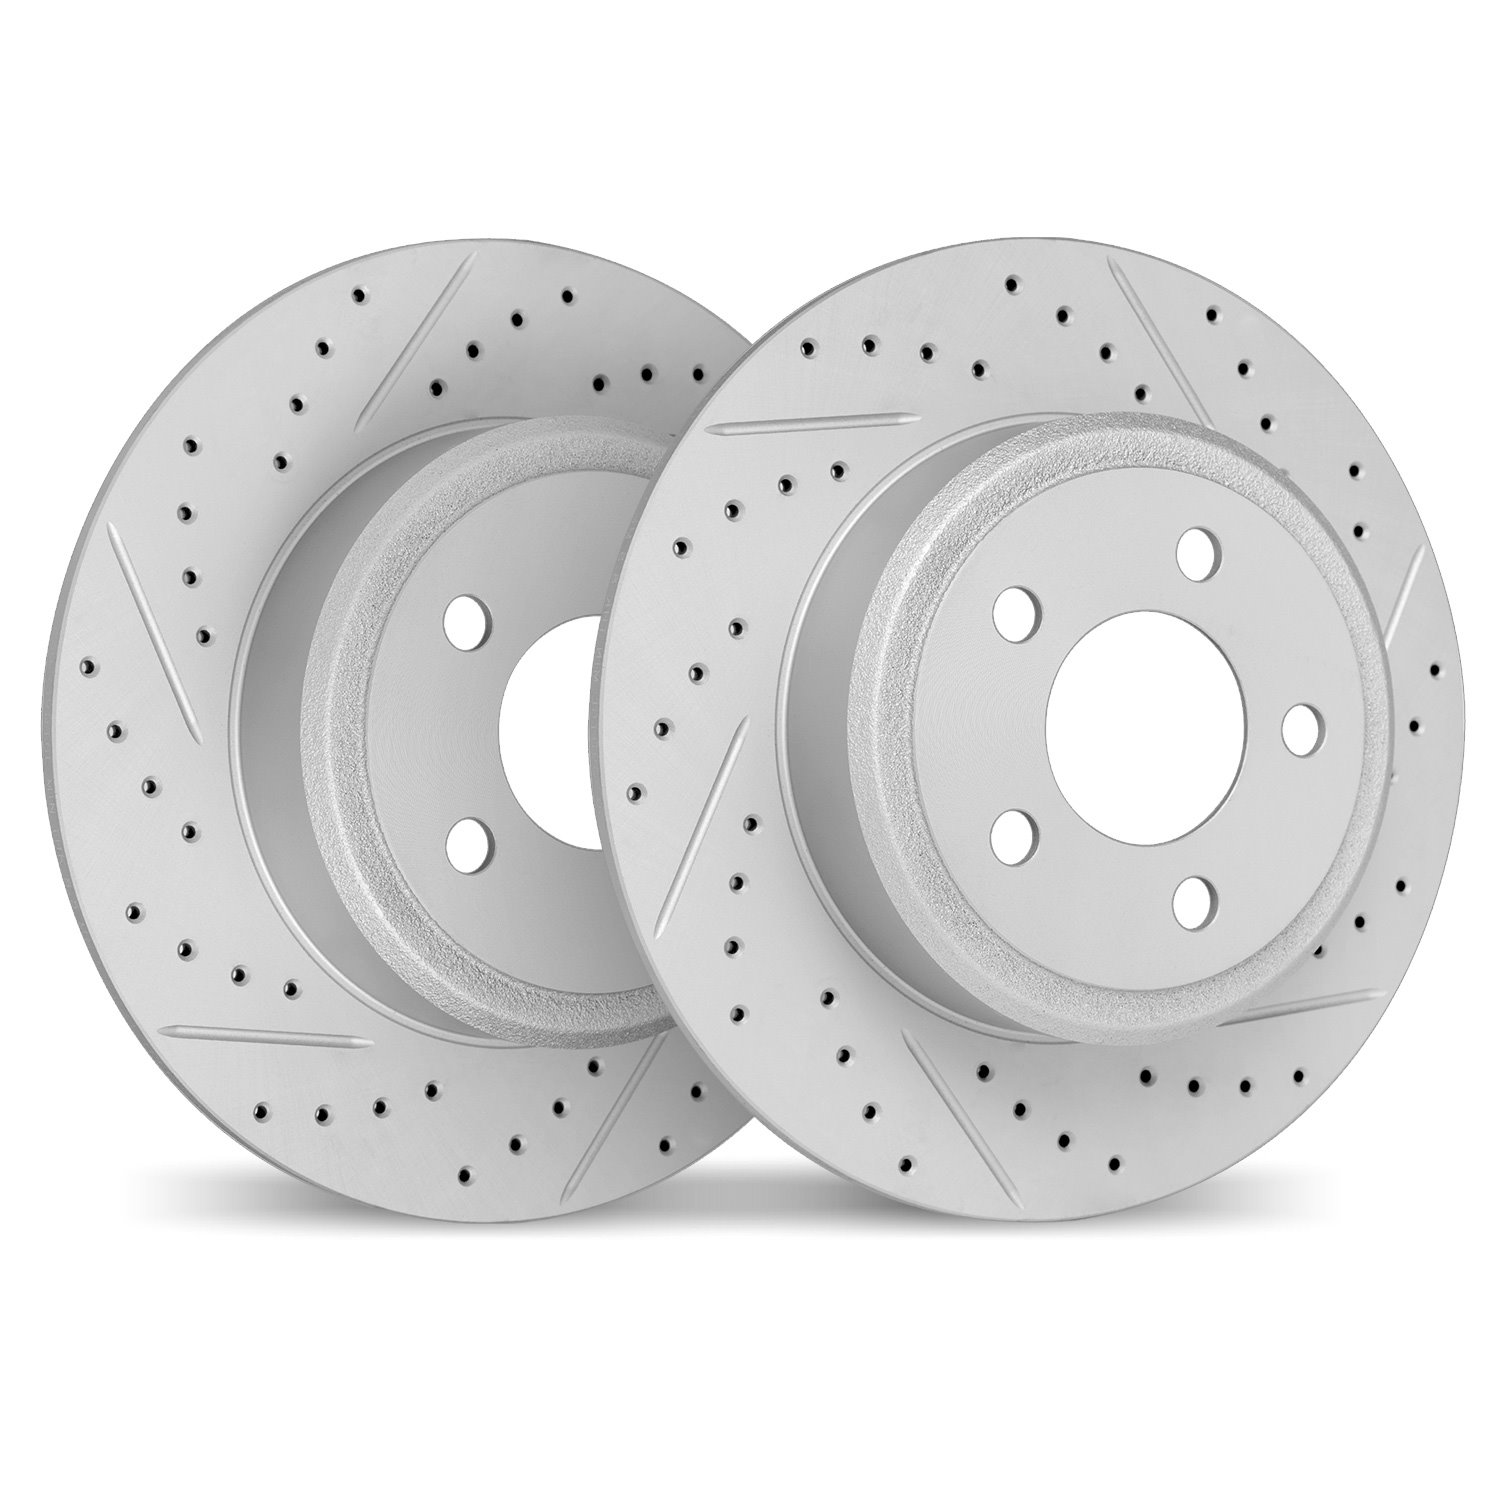 2002-76066 Geoperformance Drilled/Slotted Brake Rotors, 2004-2010 Lexus/Toyota/Scion, Position: Rear